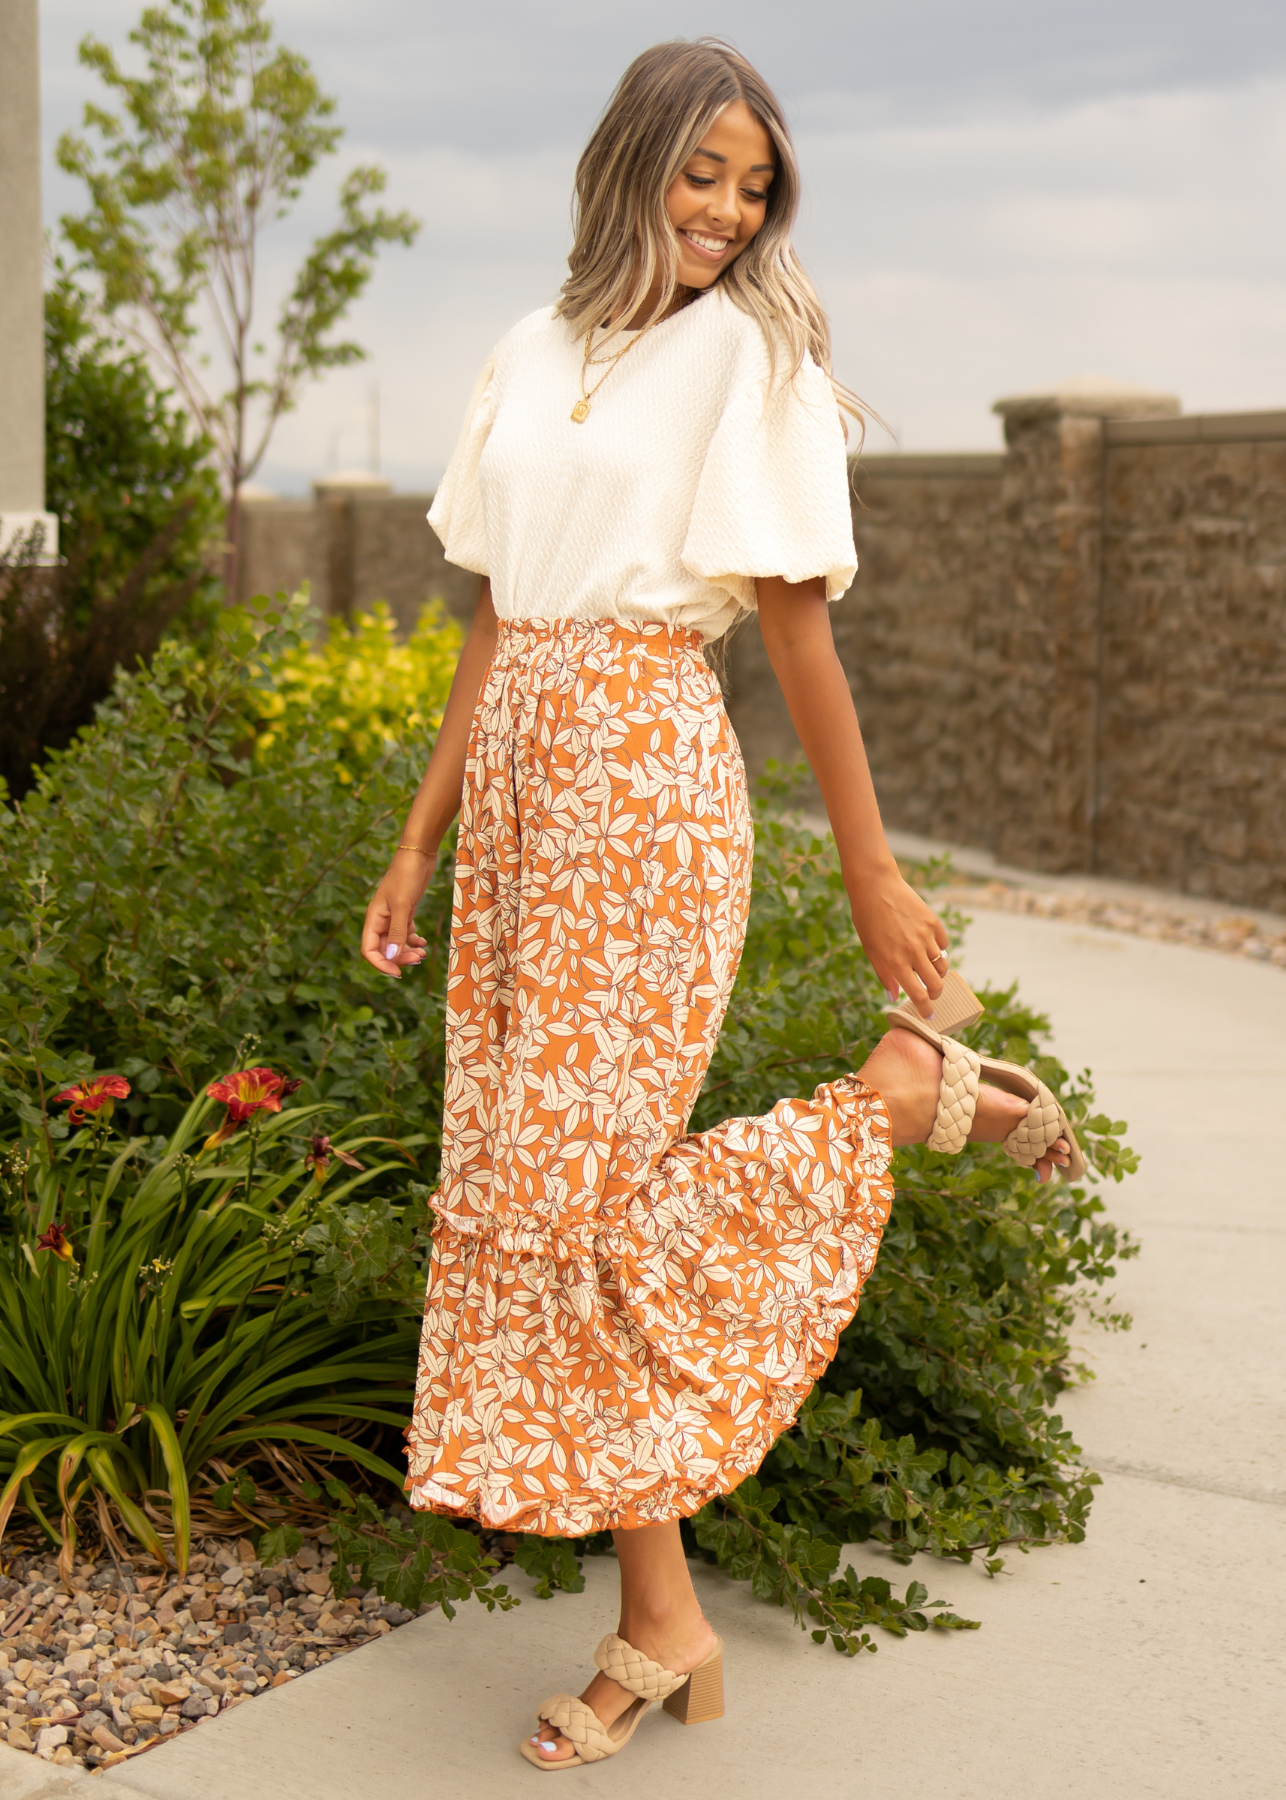 Rust floral skirt with ruffle at the bottom